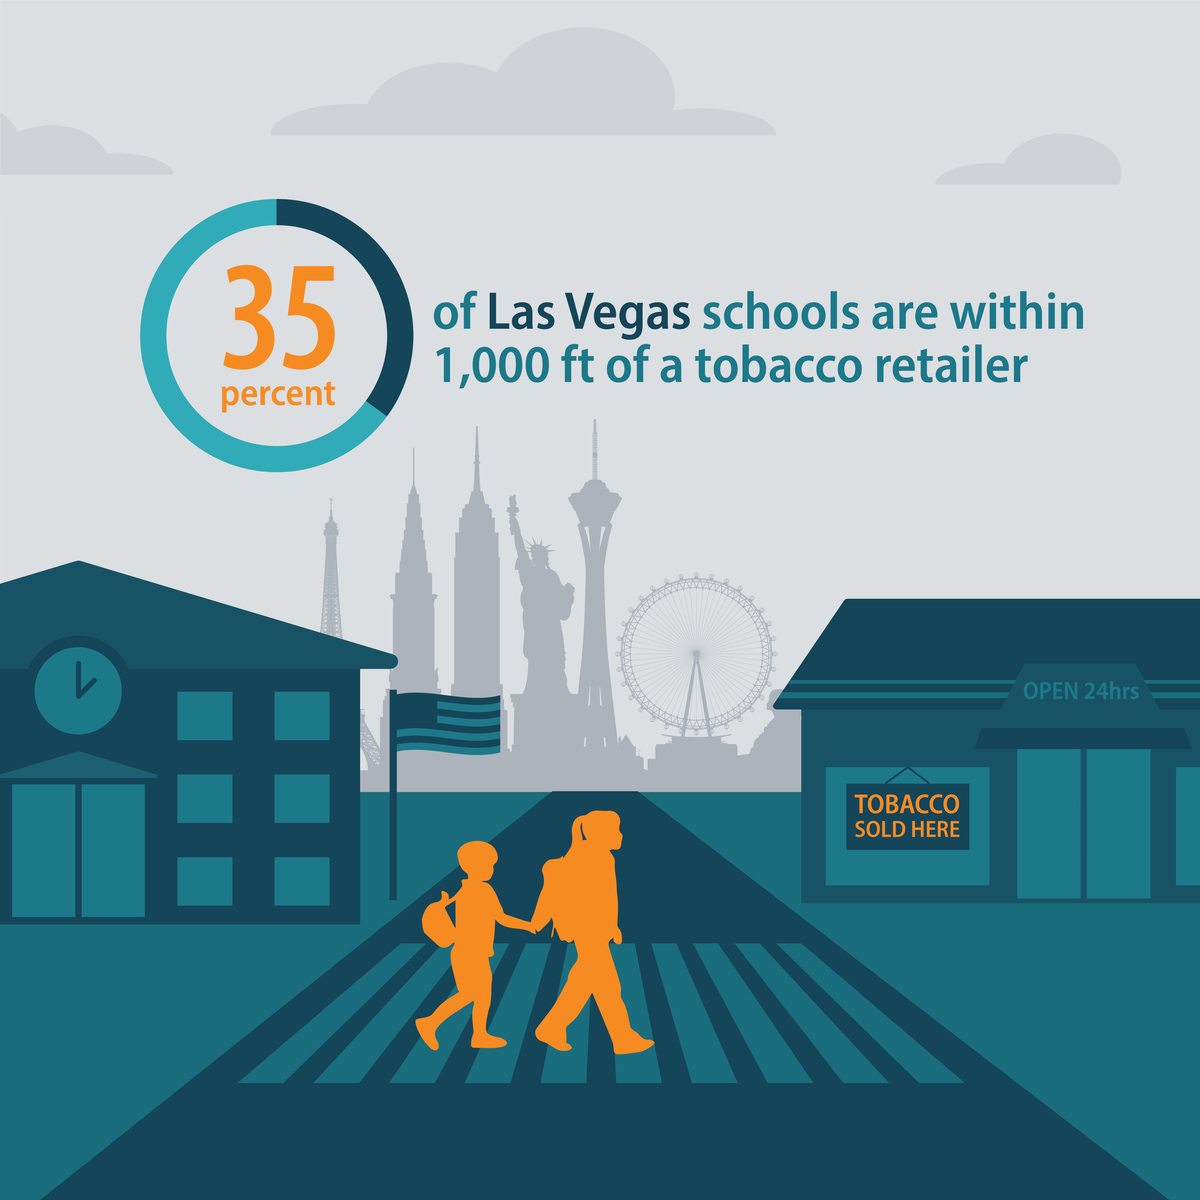 36 percent of Las Vegas schools are within 1,000 feet of a tobacco retailer